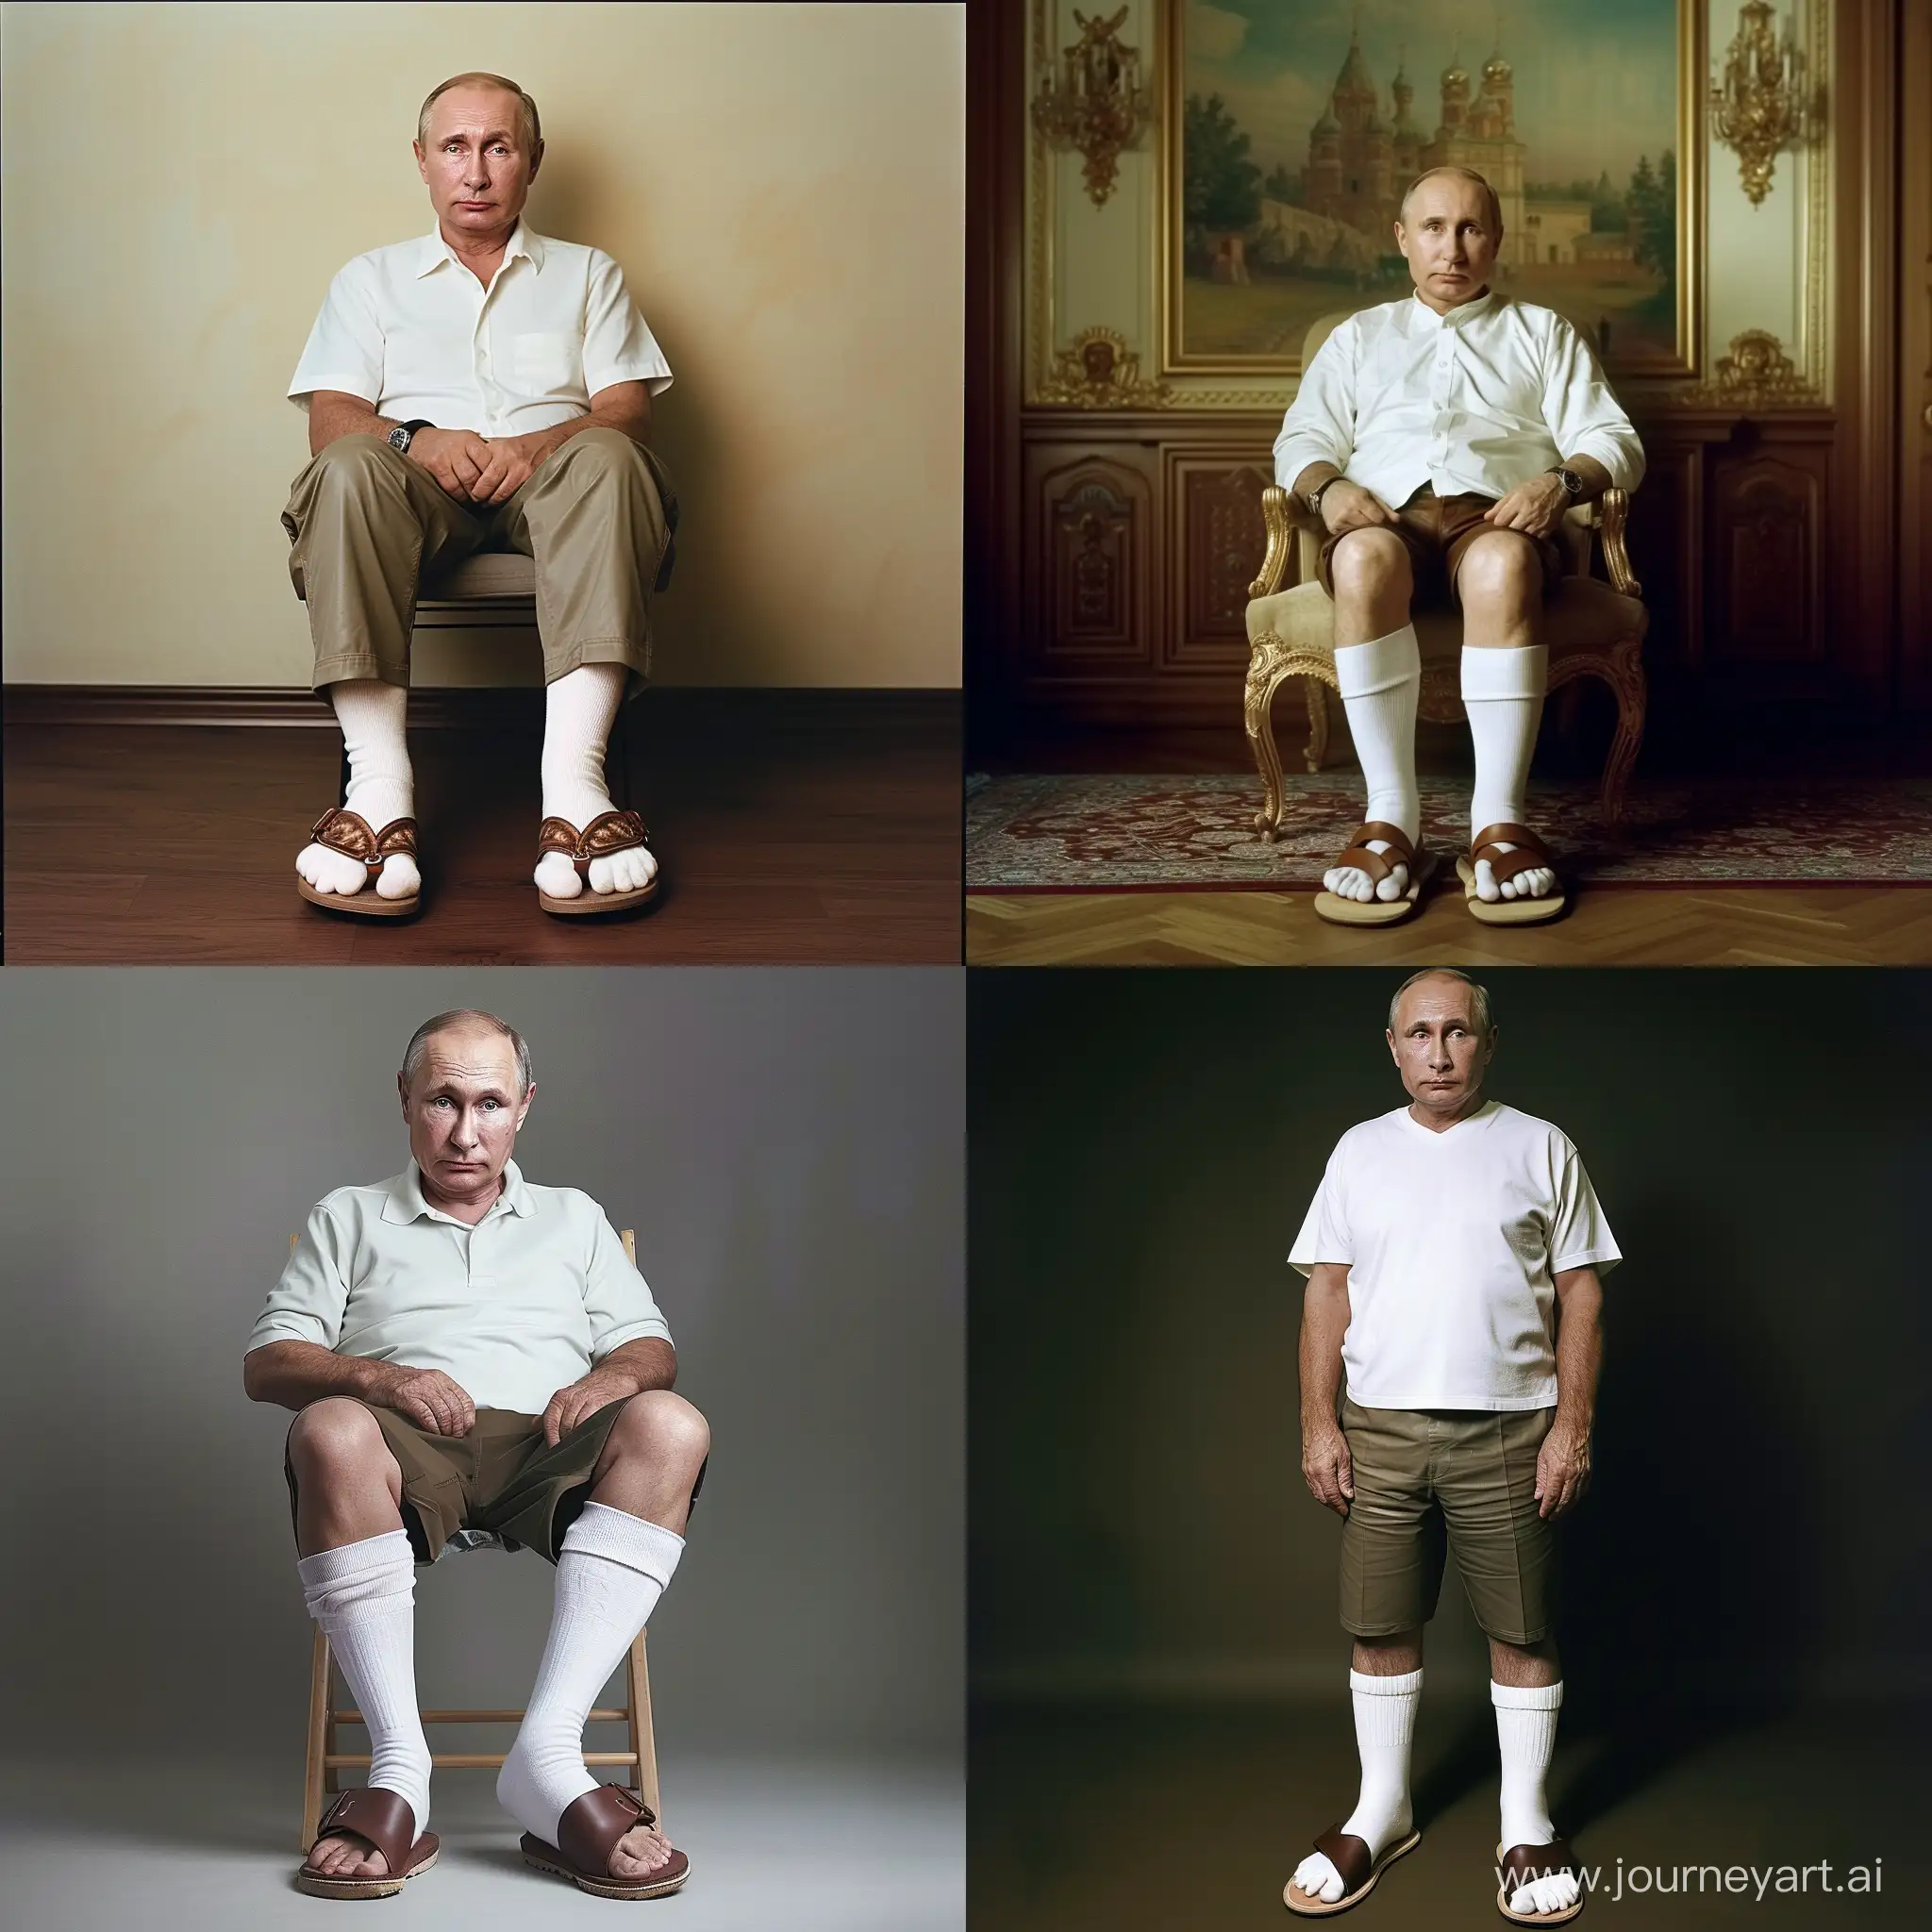 Vladimir-Putins-Realistic-Portrait-Leader-in-Casual-Style-with-Leather-Sandals-and-White-Socks